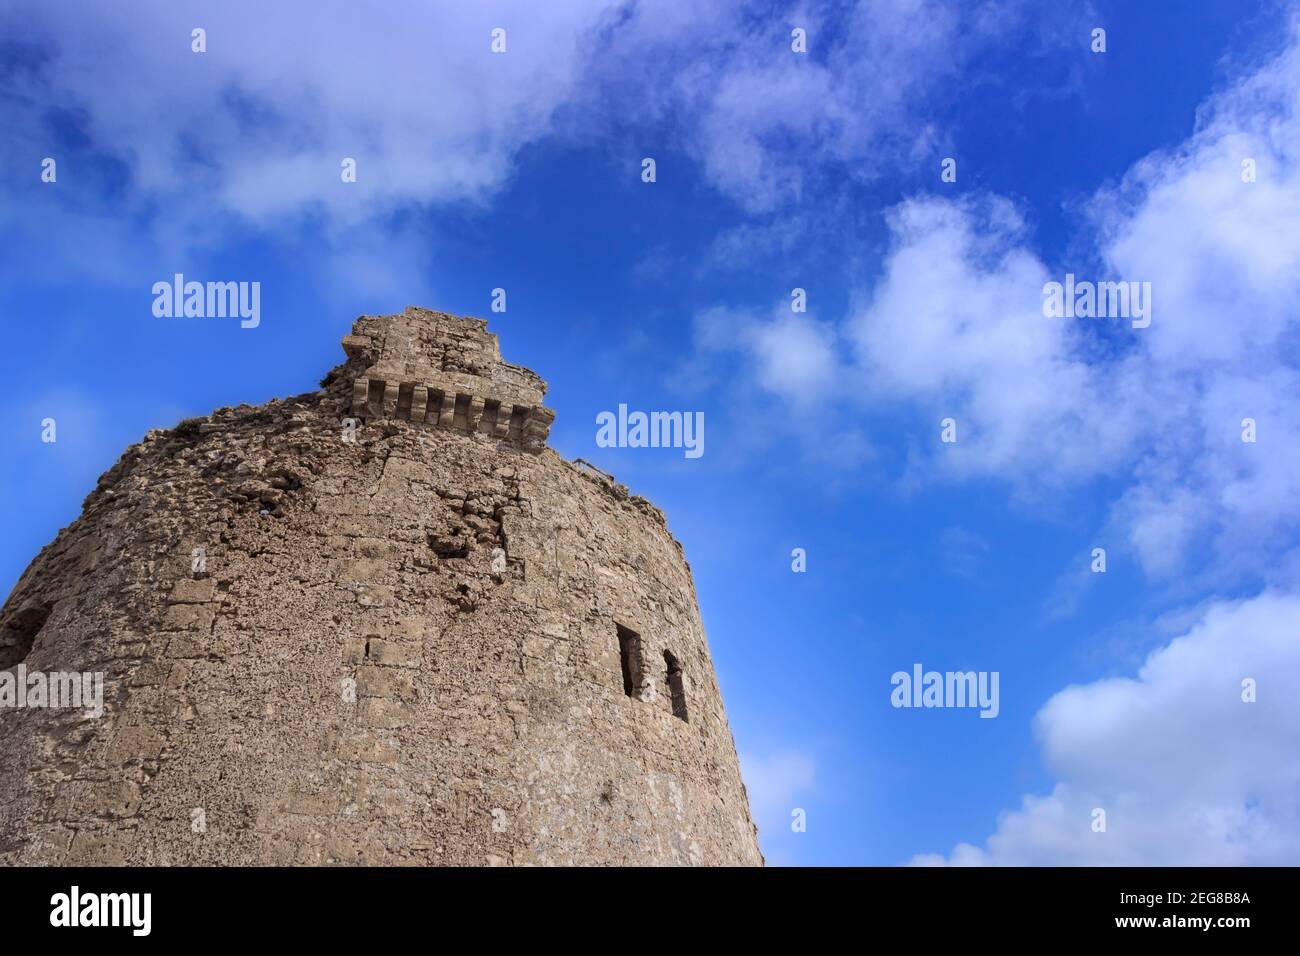 Torre Mozza Watchtower in Apulia, Italy.The tower was built by order of King Charles V in the 16th century. It was used for the defense of Salento's c Stock Photo